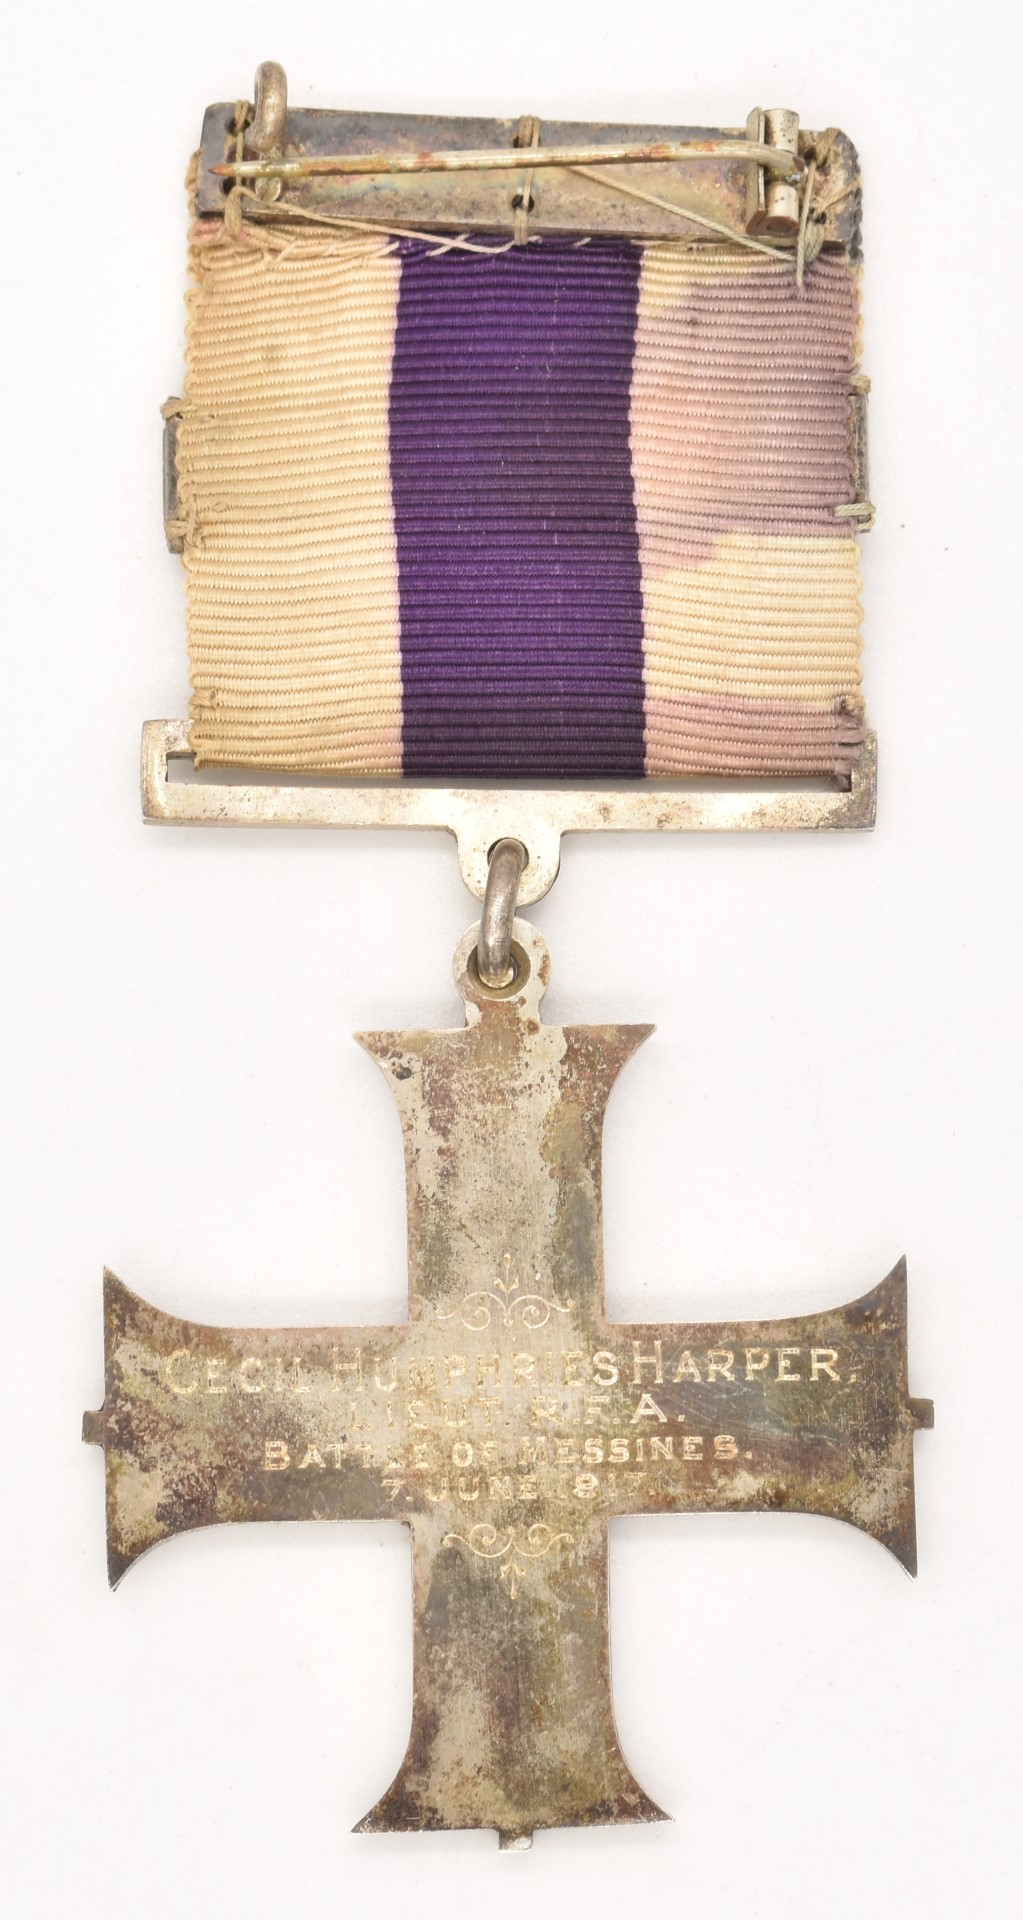 British Army WW1 Royal Artillery Military Cross medal and bar inscribed Cecil Humphries Harper, - Image 5 of 5